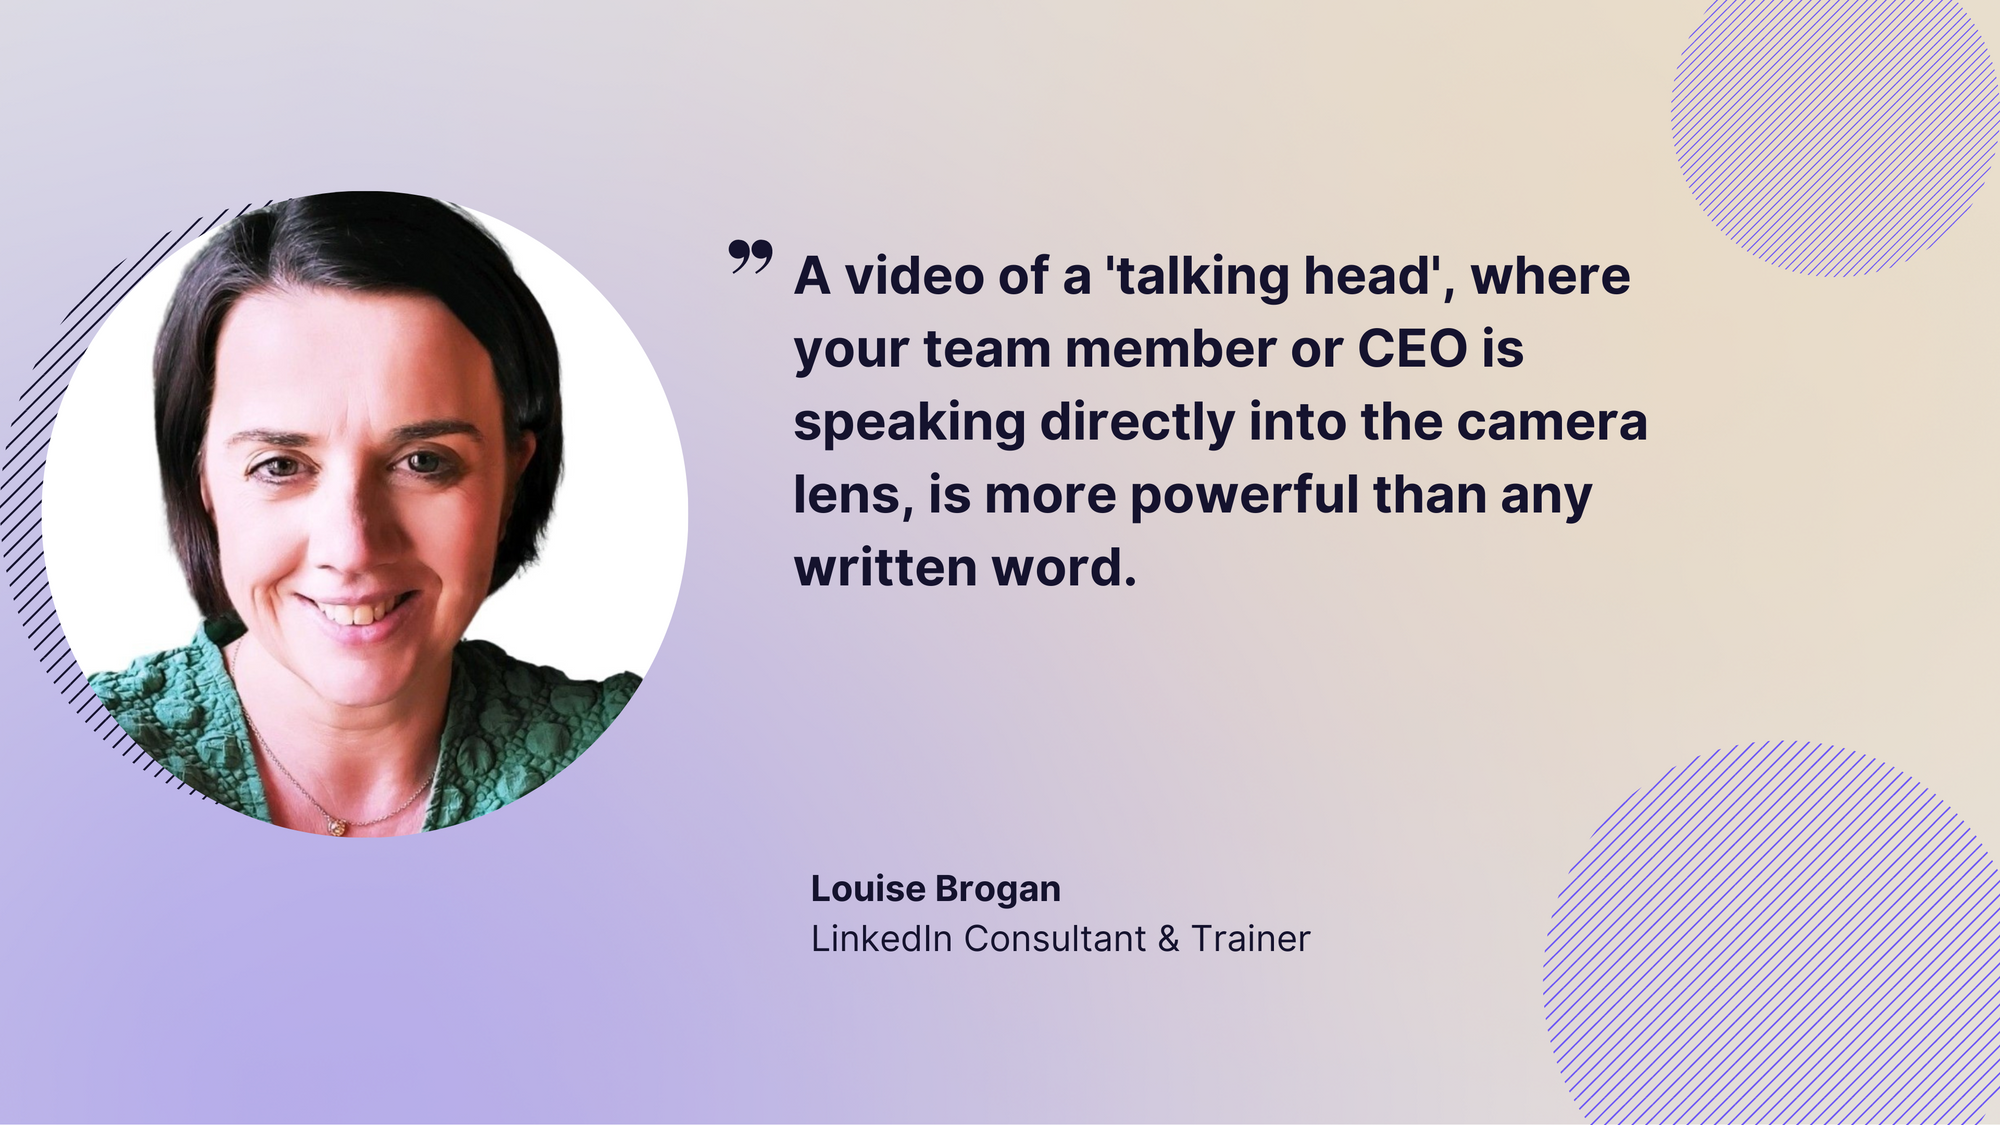 use videos with your team members or CEOs